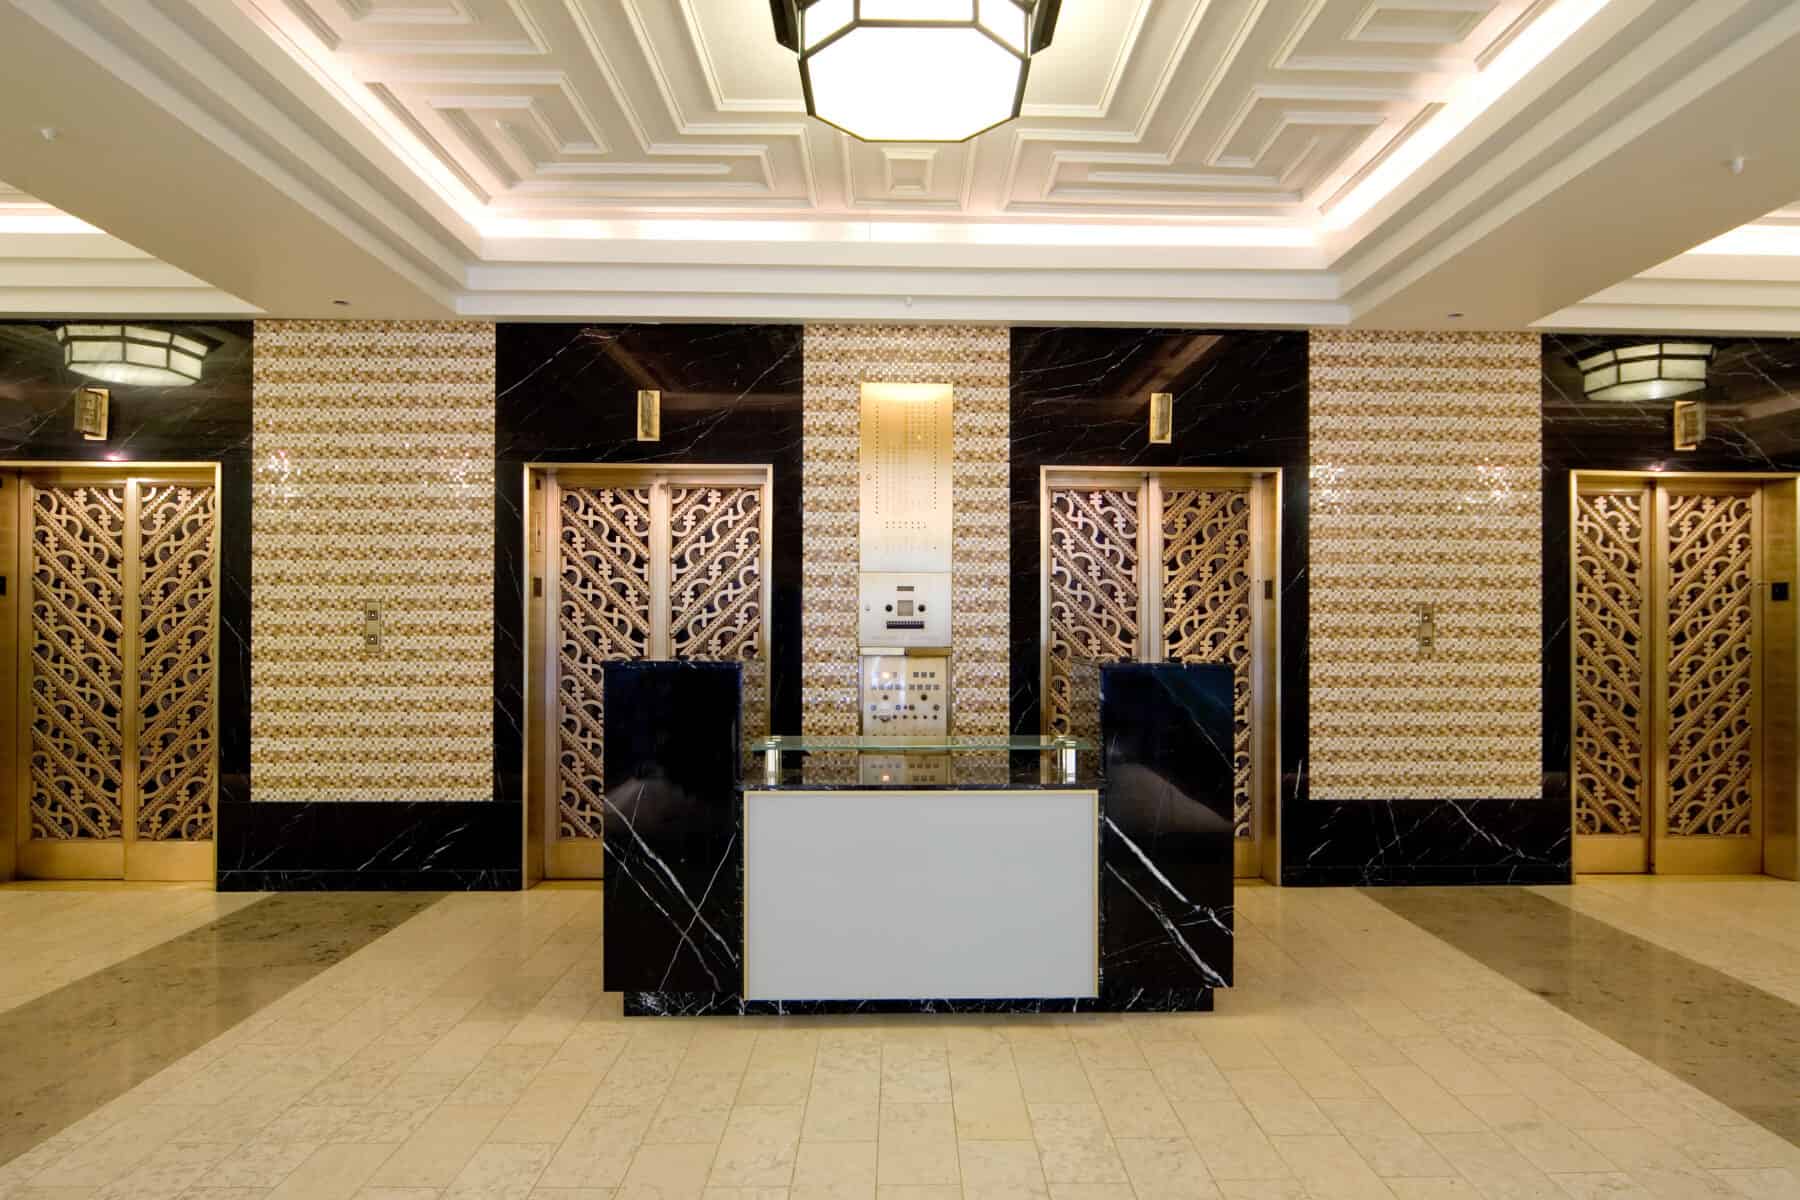 Intricate Art Deco La Salle Street Lobby Remodel Including Metal and Stonework by Commercial Builder & General Contractor Structural Enterprises